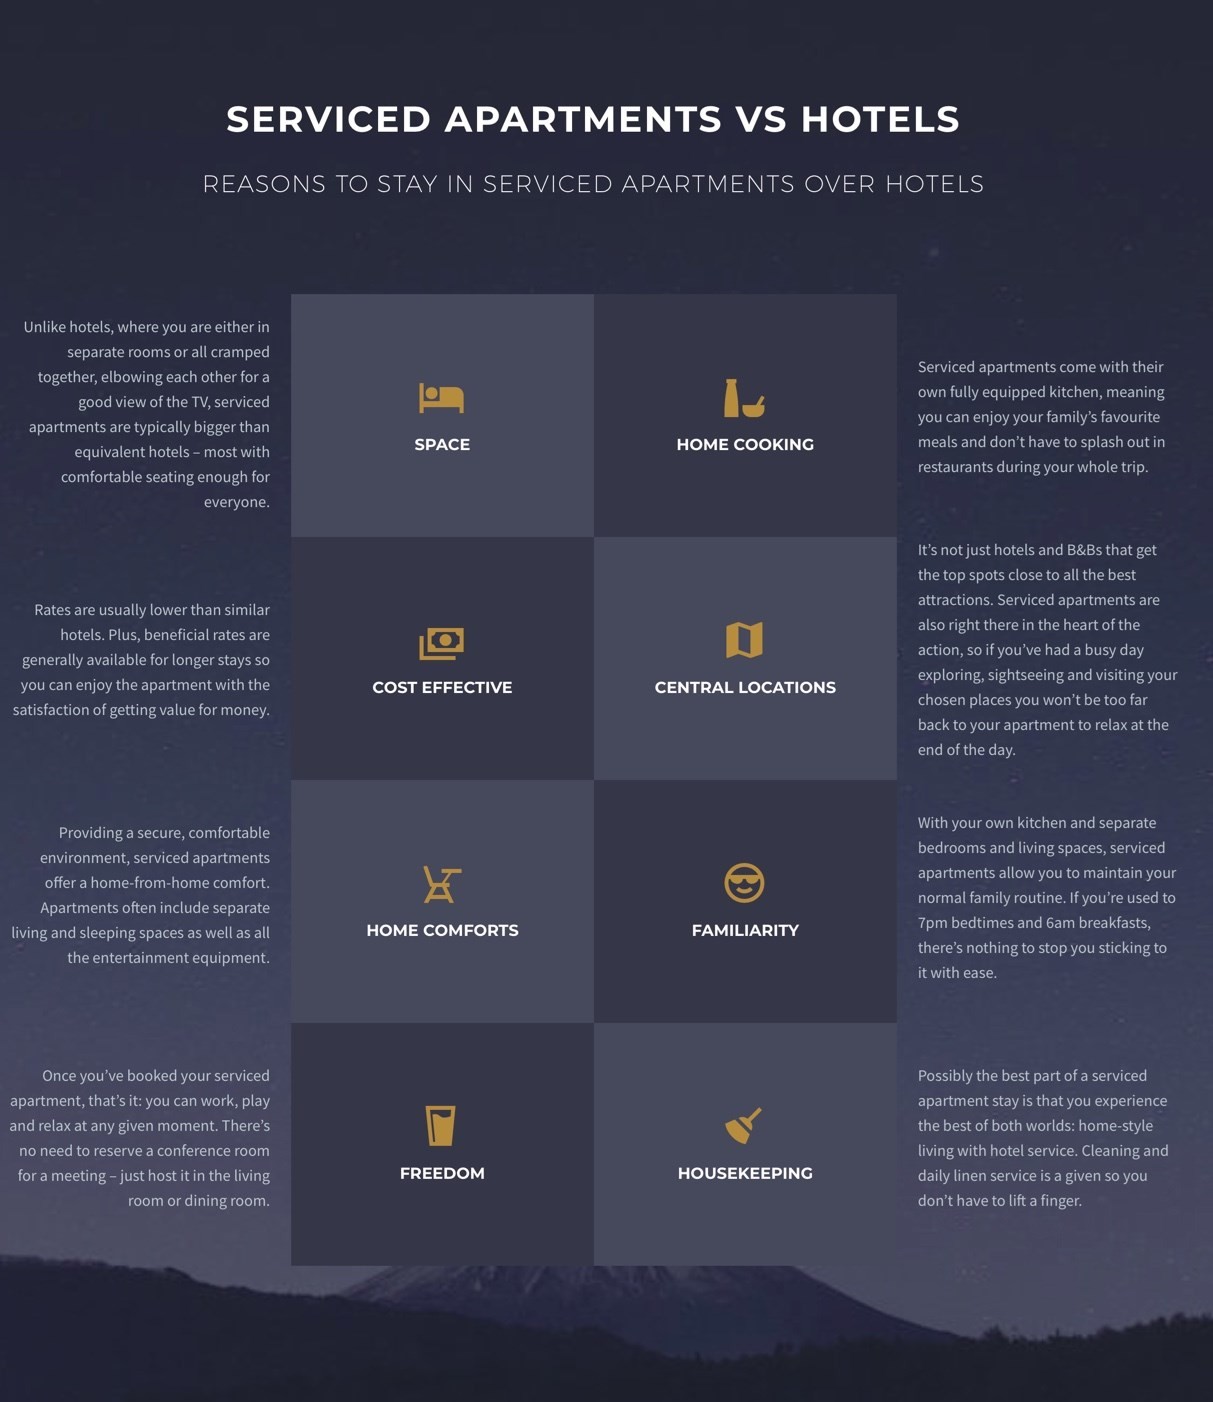 Serviced apartments versus Hotels